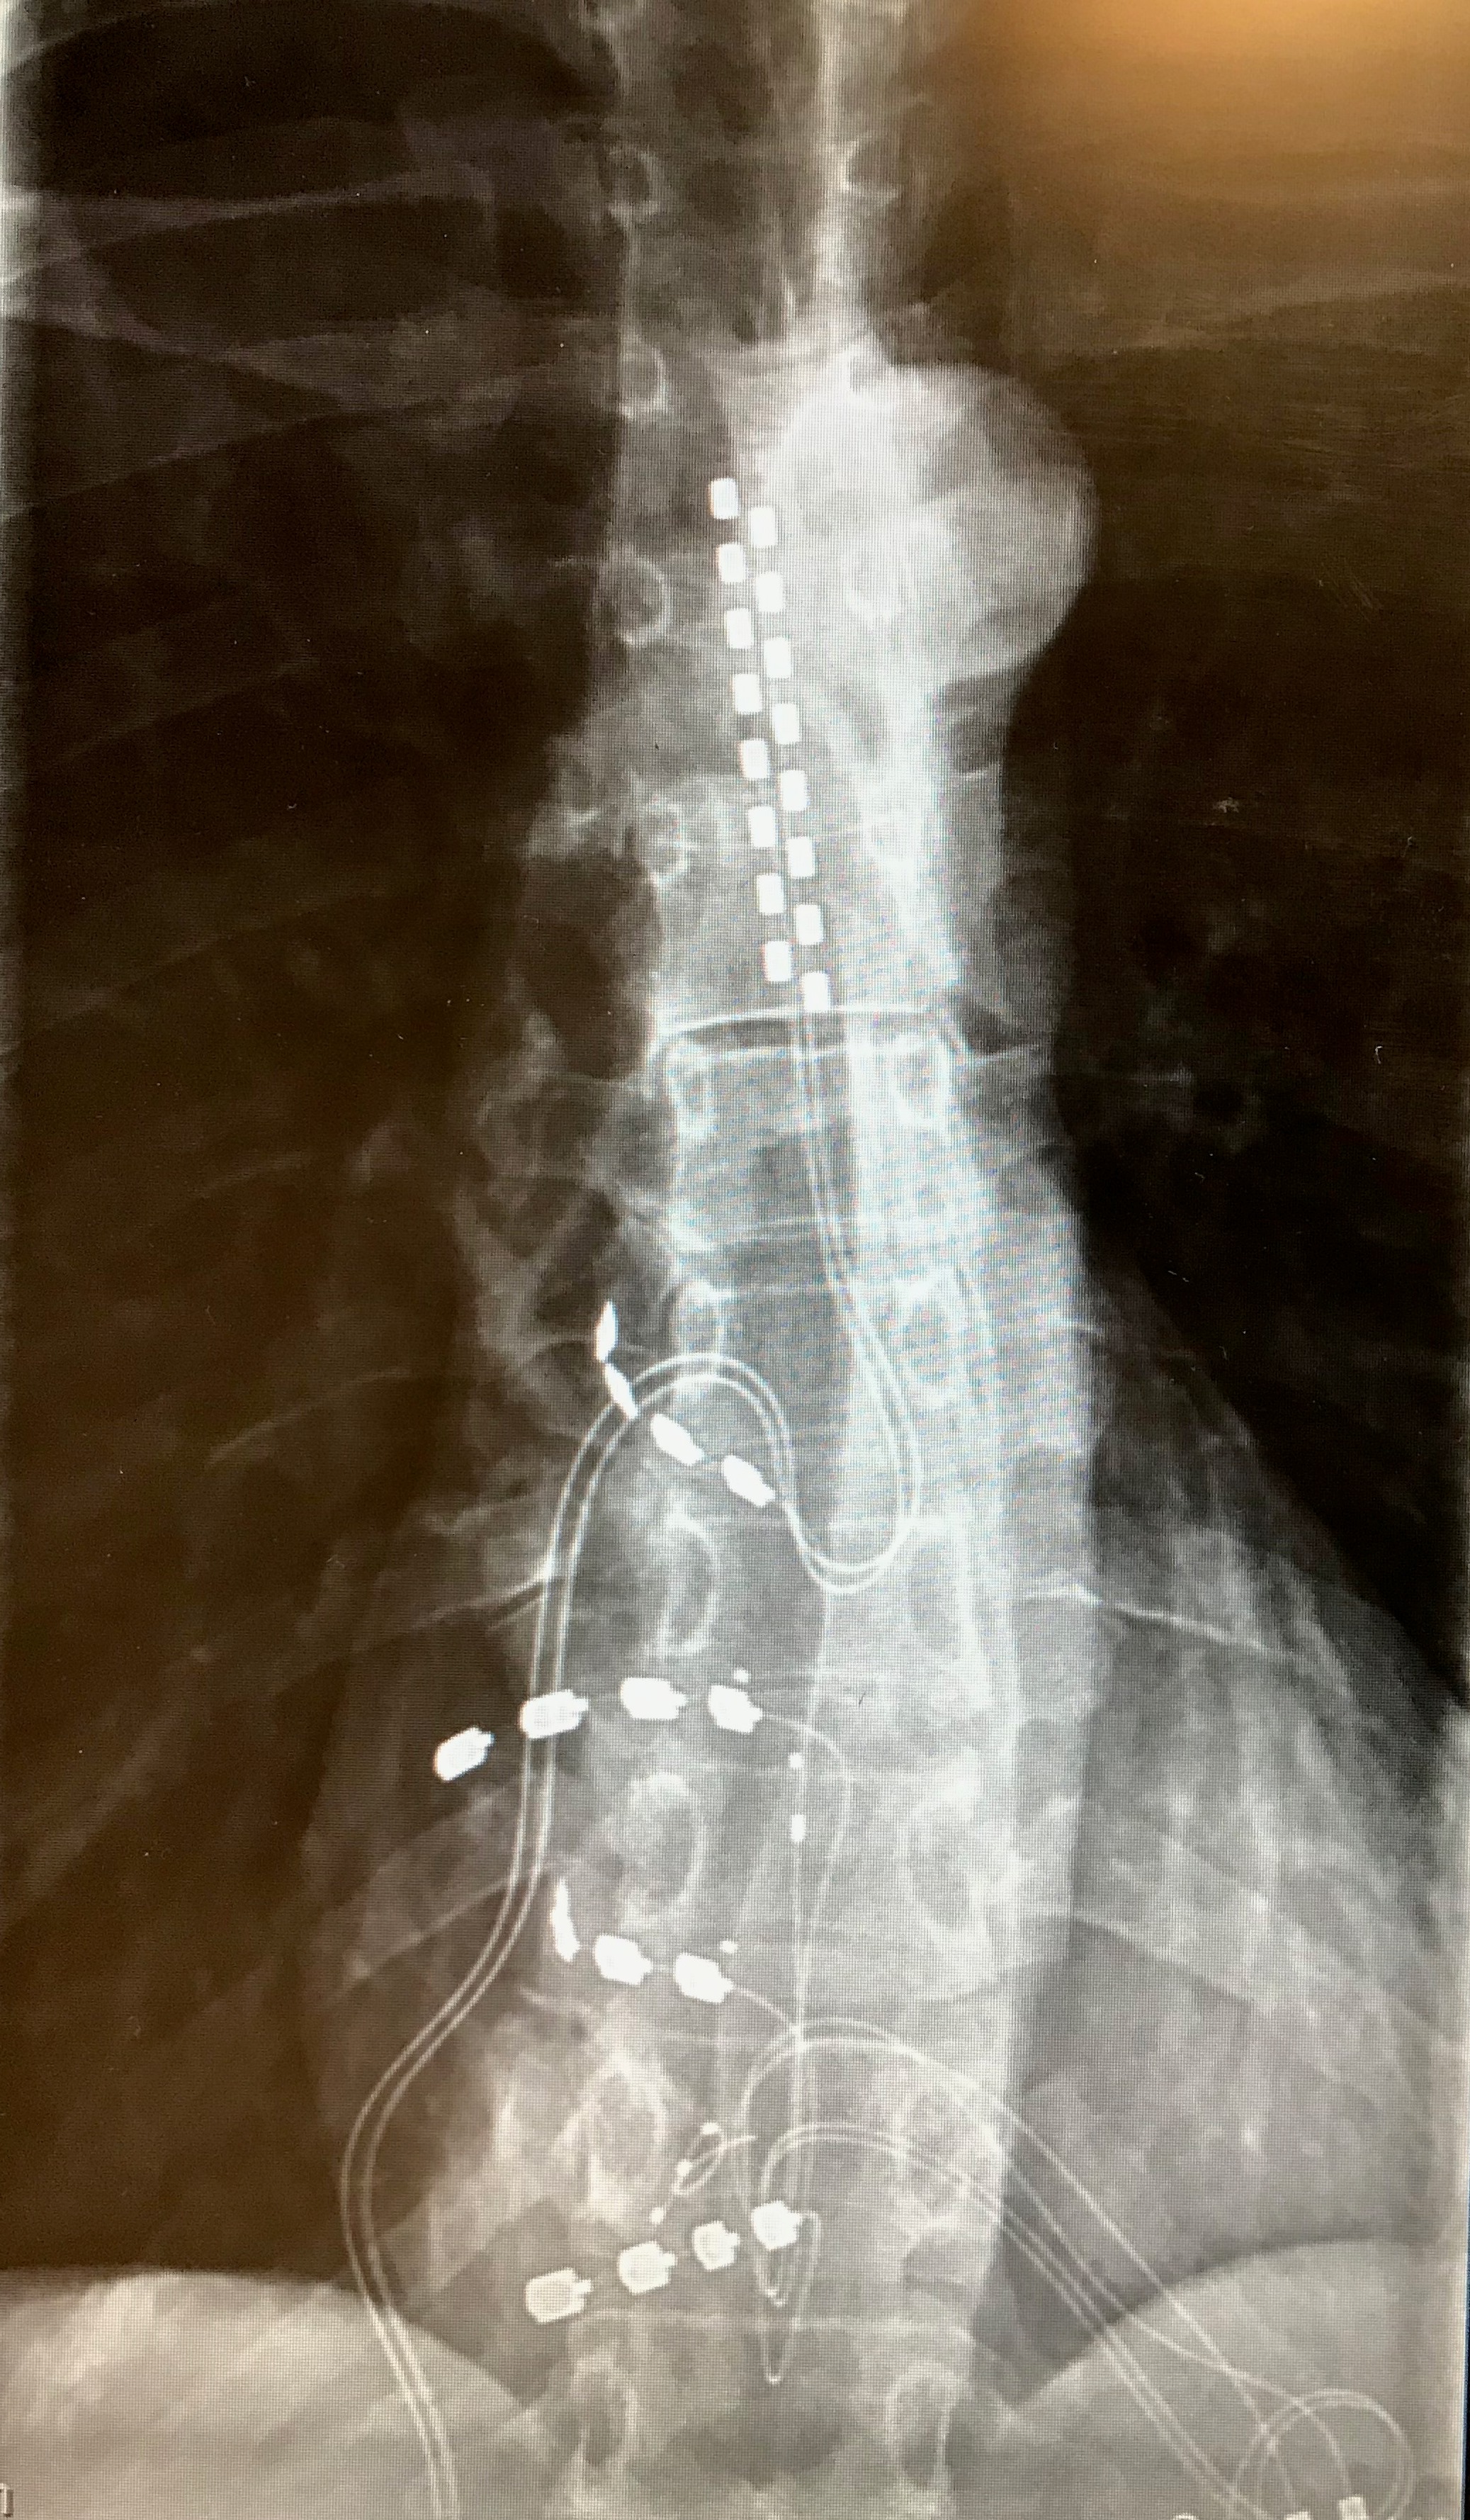 Mrs Cameron's x-ray with implants around her spine